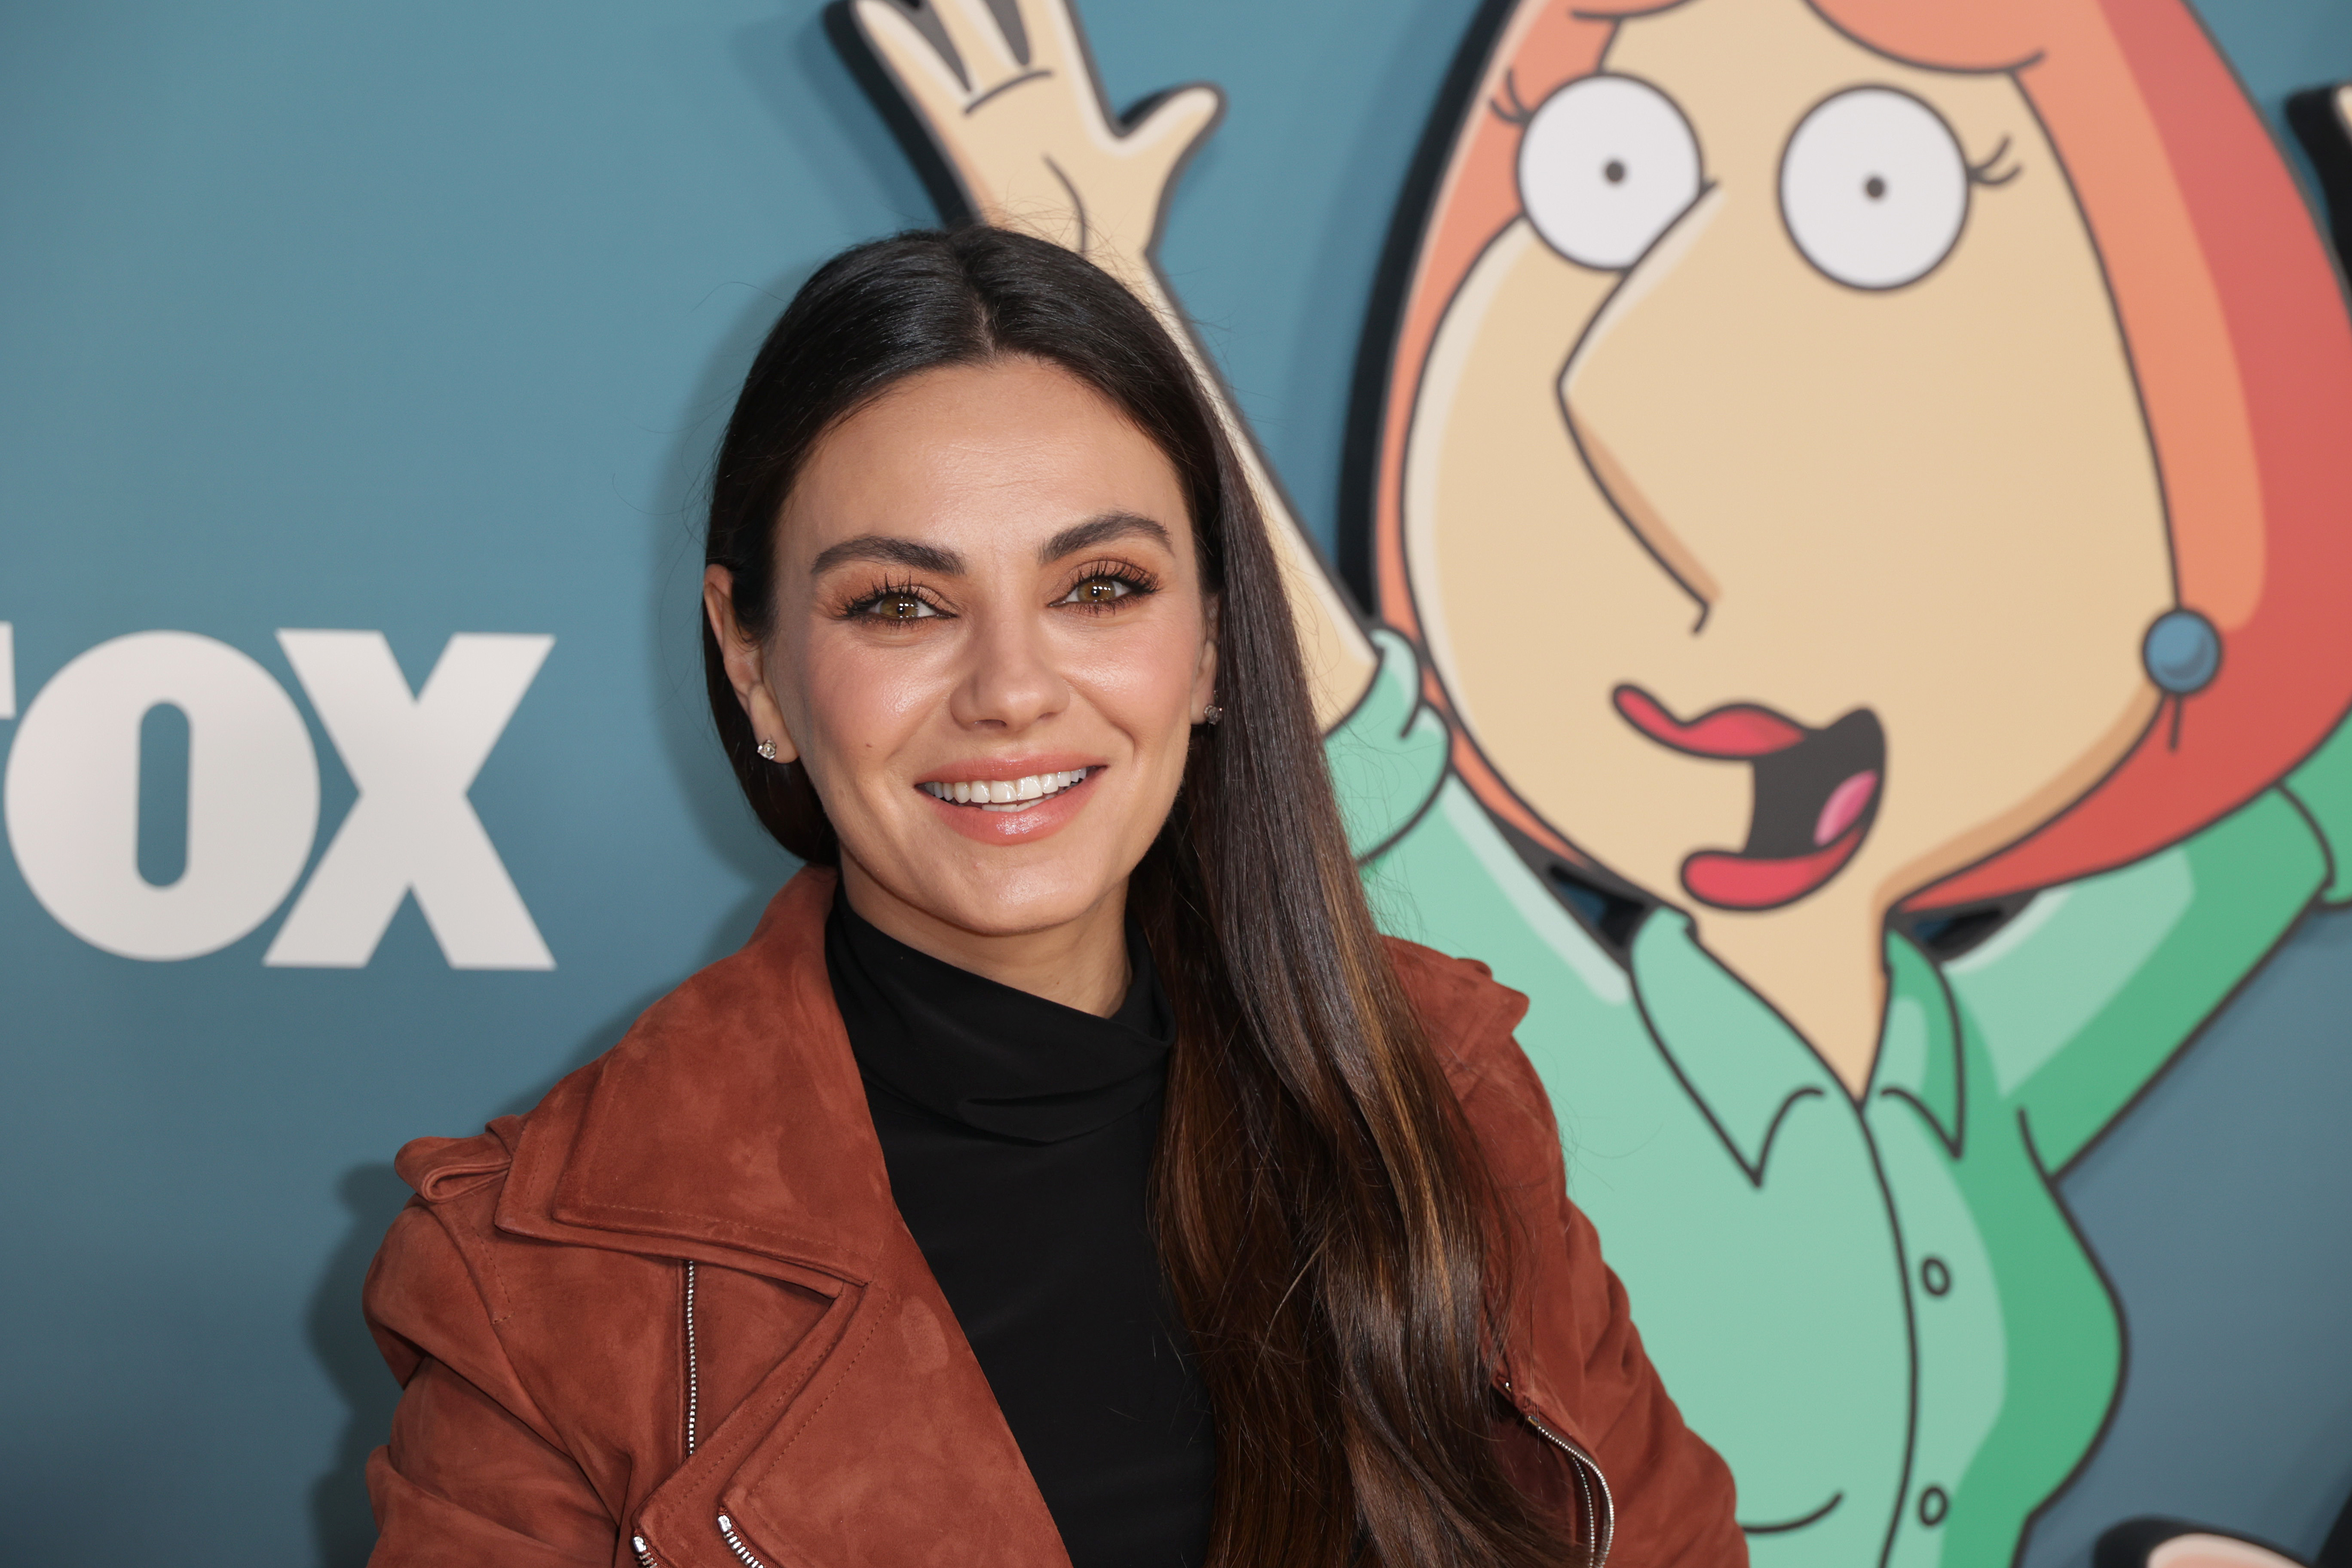 Mila Kunis at the Fox's "Family Guy" 400th Episode Celebration at Fox Studio Lot on November 12, 2022, in Los Angeles, California. | Source: Getty Images